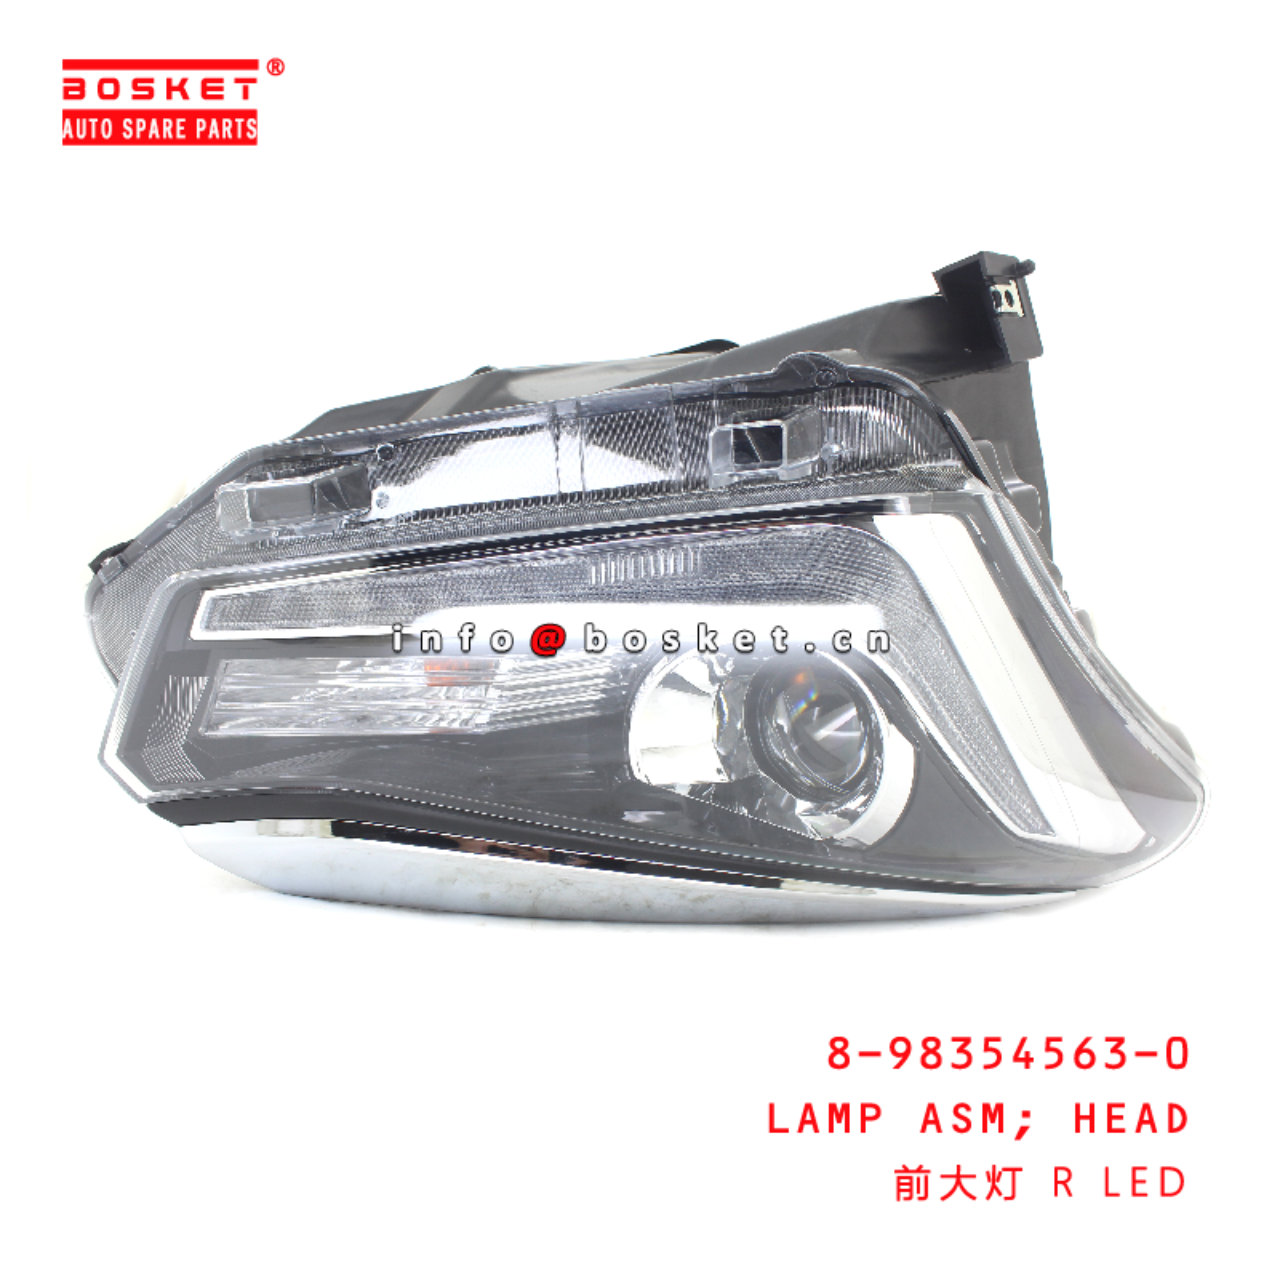 8-98354563-0 Head Lamp Assembly suitable for ISUZU DMAX2019  8983545630